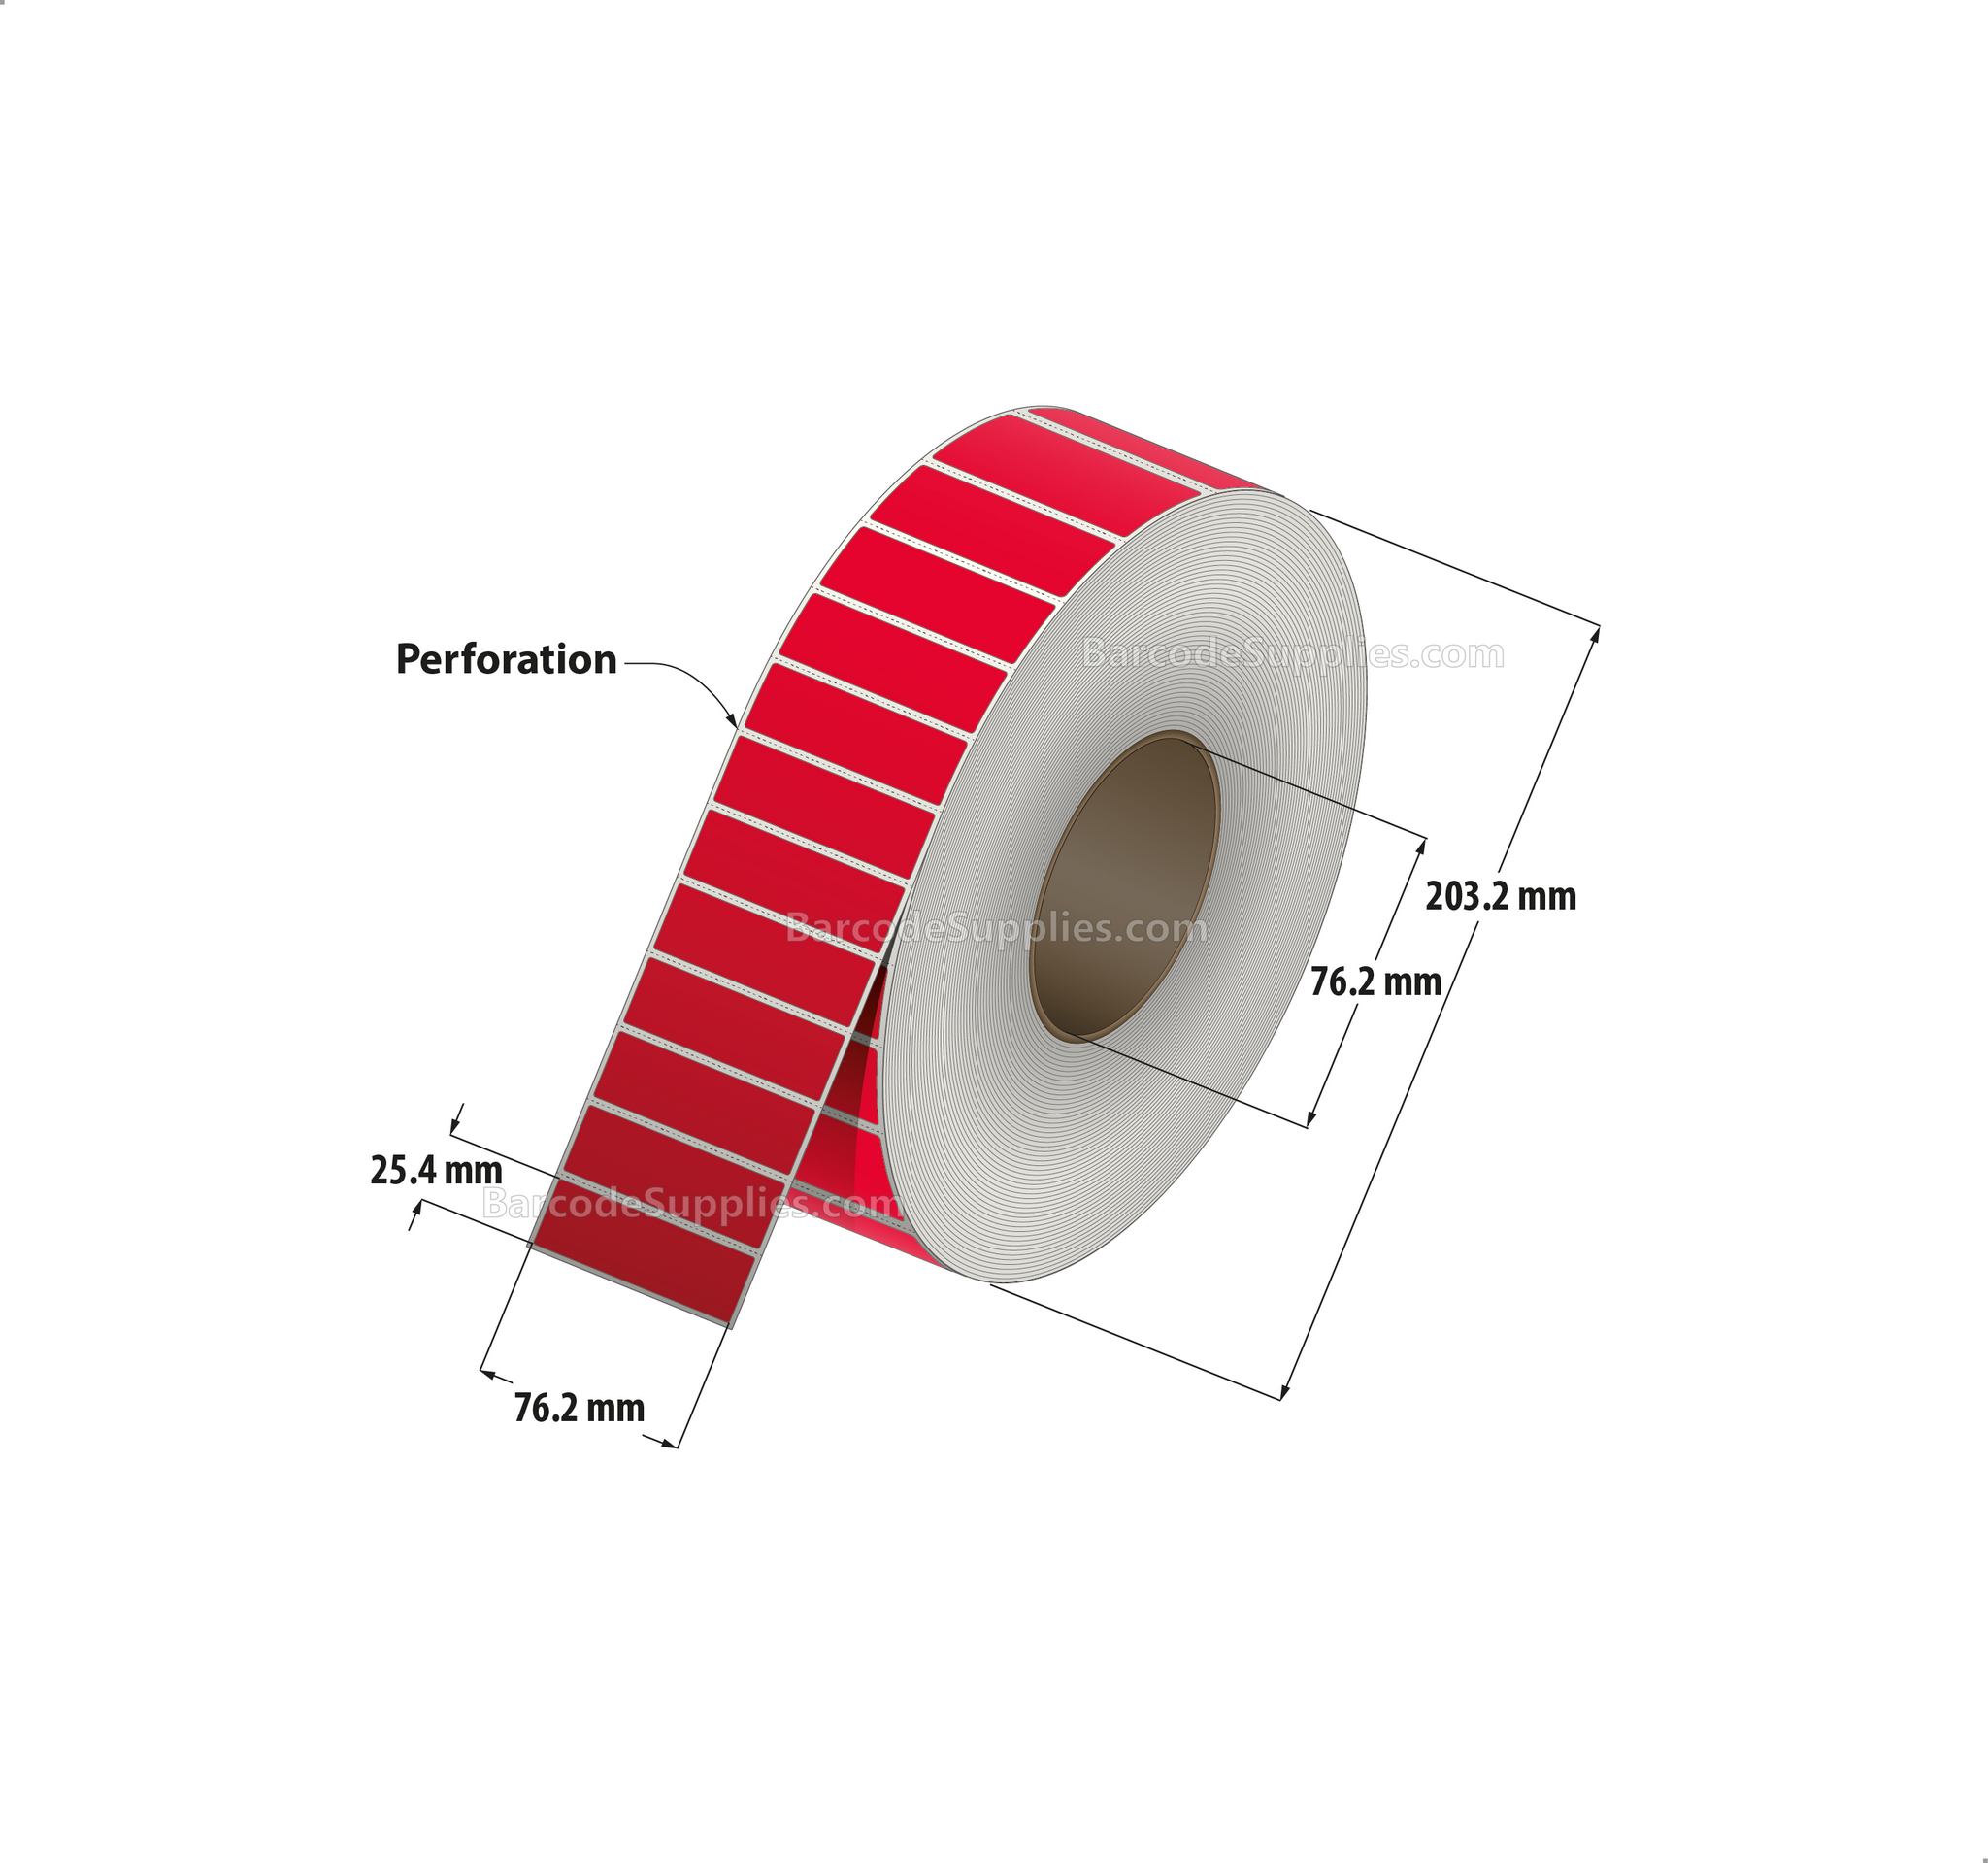 3 x 1 Thermal Transfer 032 Red Labels With Permanent Adhesive - Perforated - 5500 Labels Per Roll - Carton Of 8 Rolls - 44000 Labels Total - MPN: RFC-3-1-5500-RD